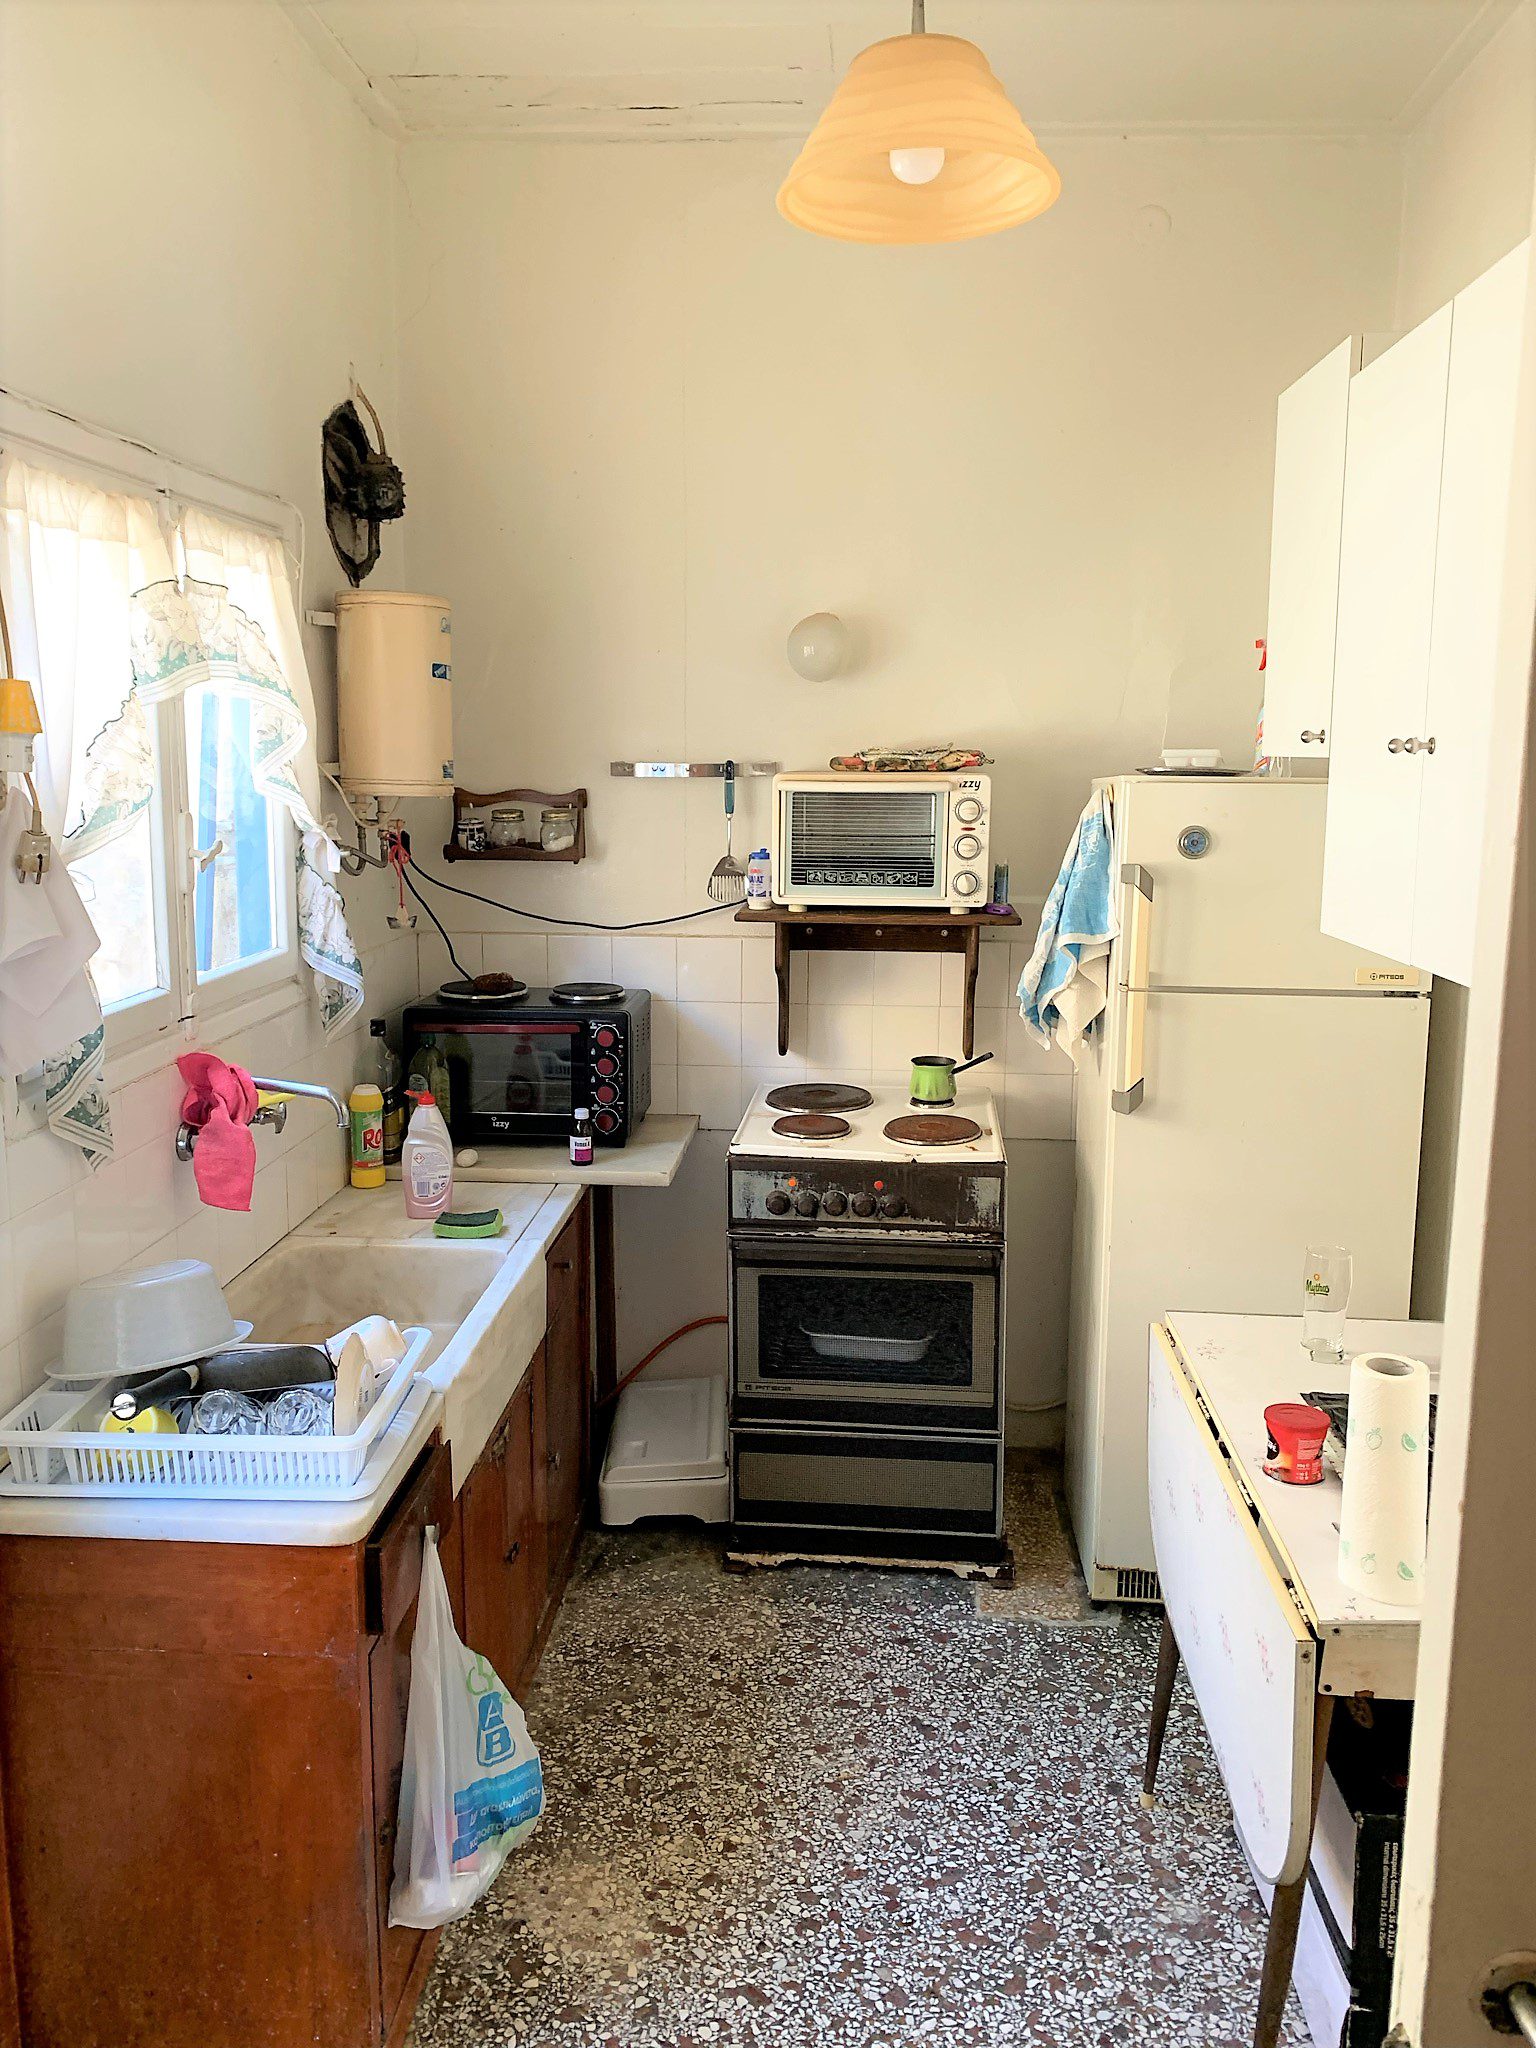 Kitchen of house for sale Ithaca Greece, Vathi